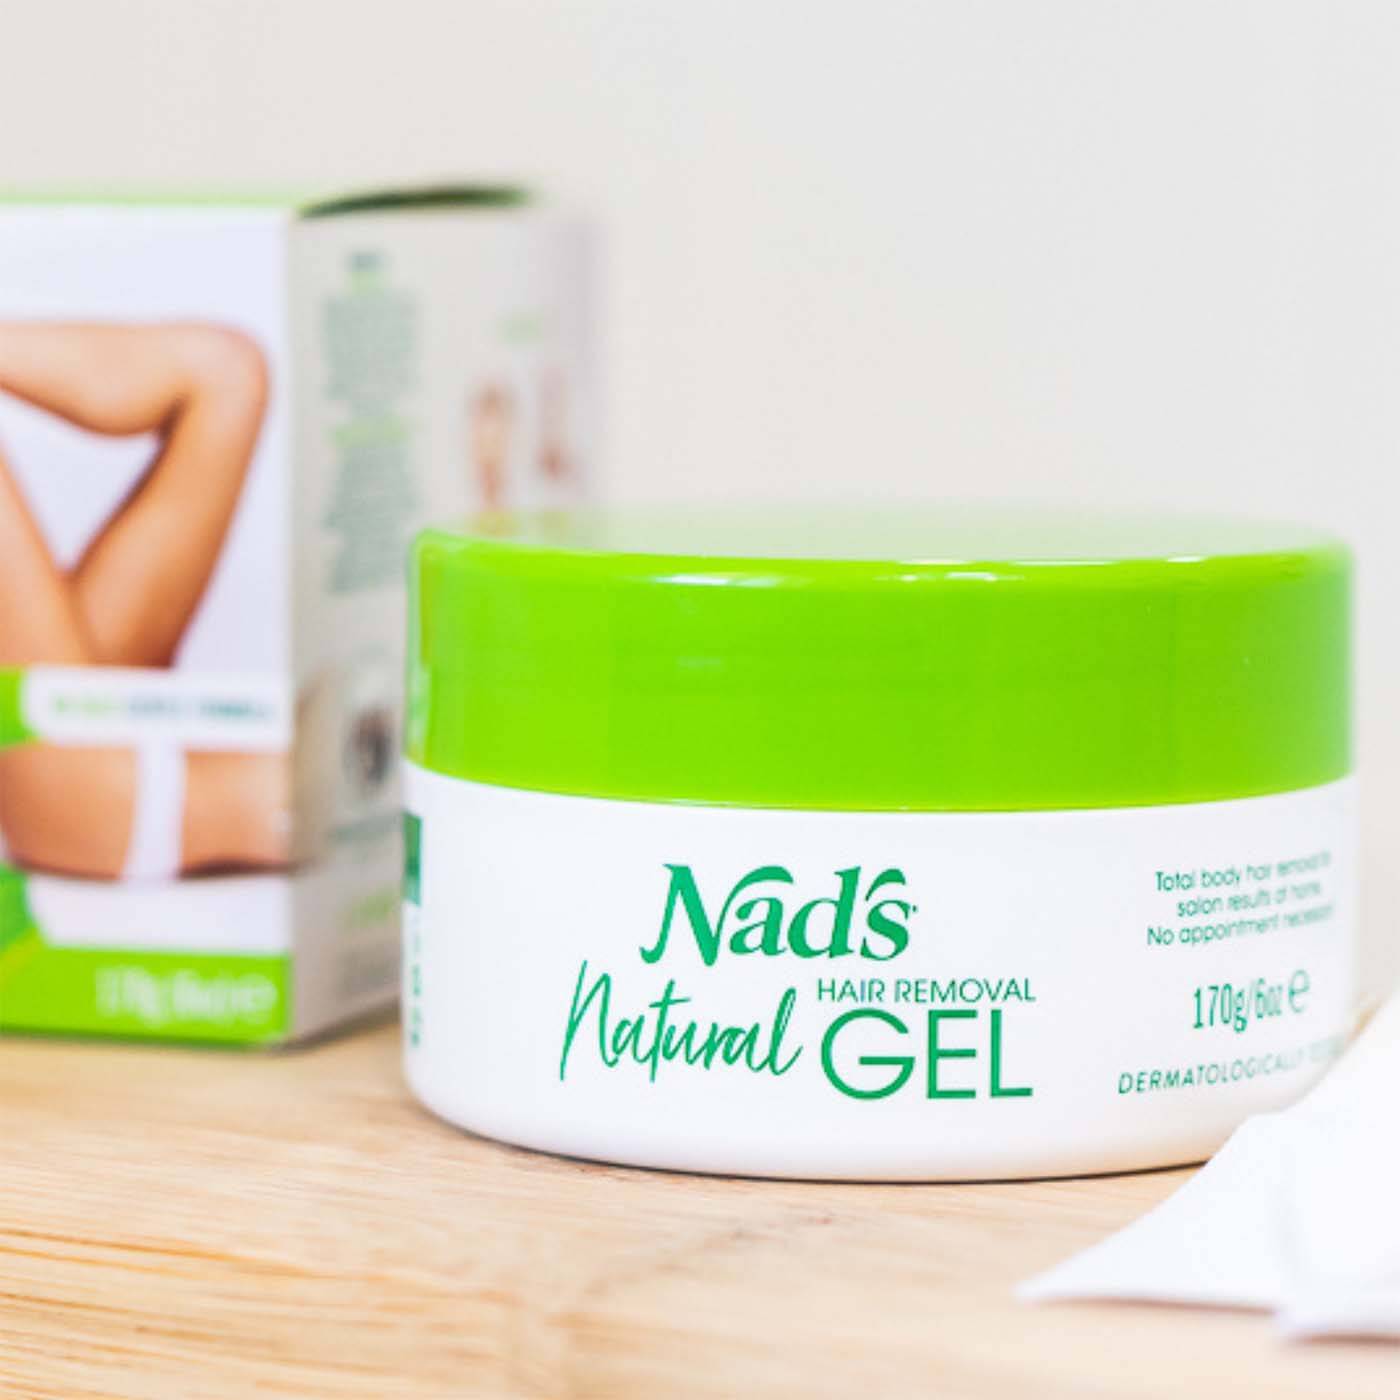 Which Nad’s Hair Removal Product is for You? | Nad's Hair Removal Blog